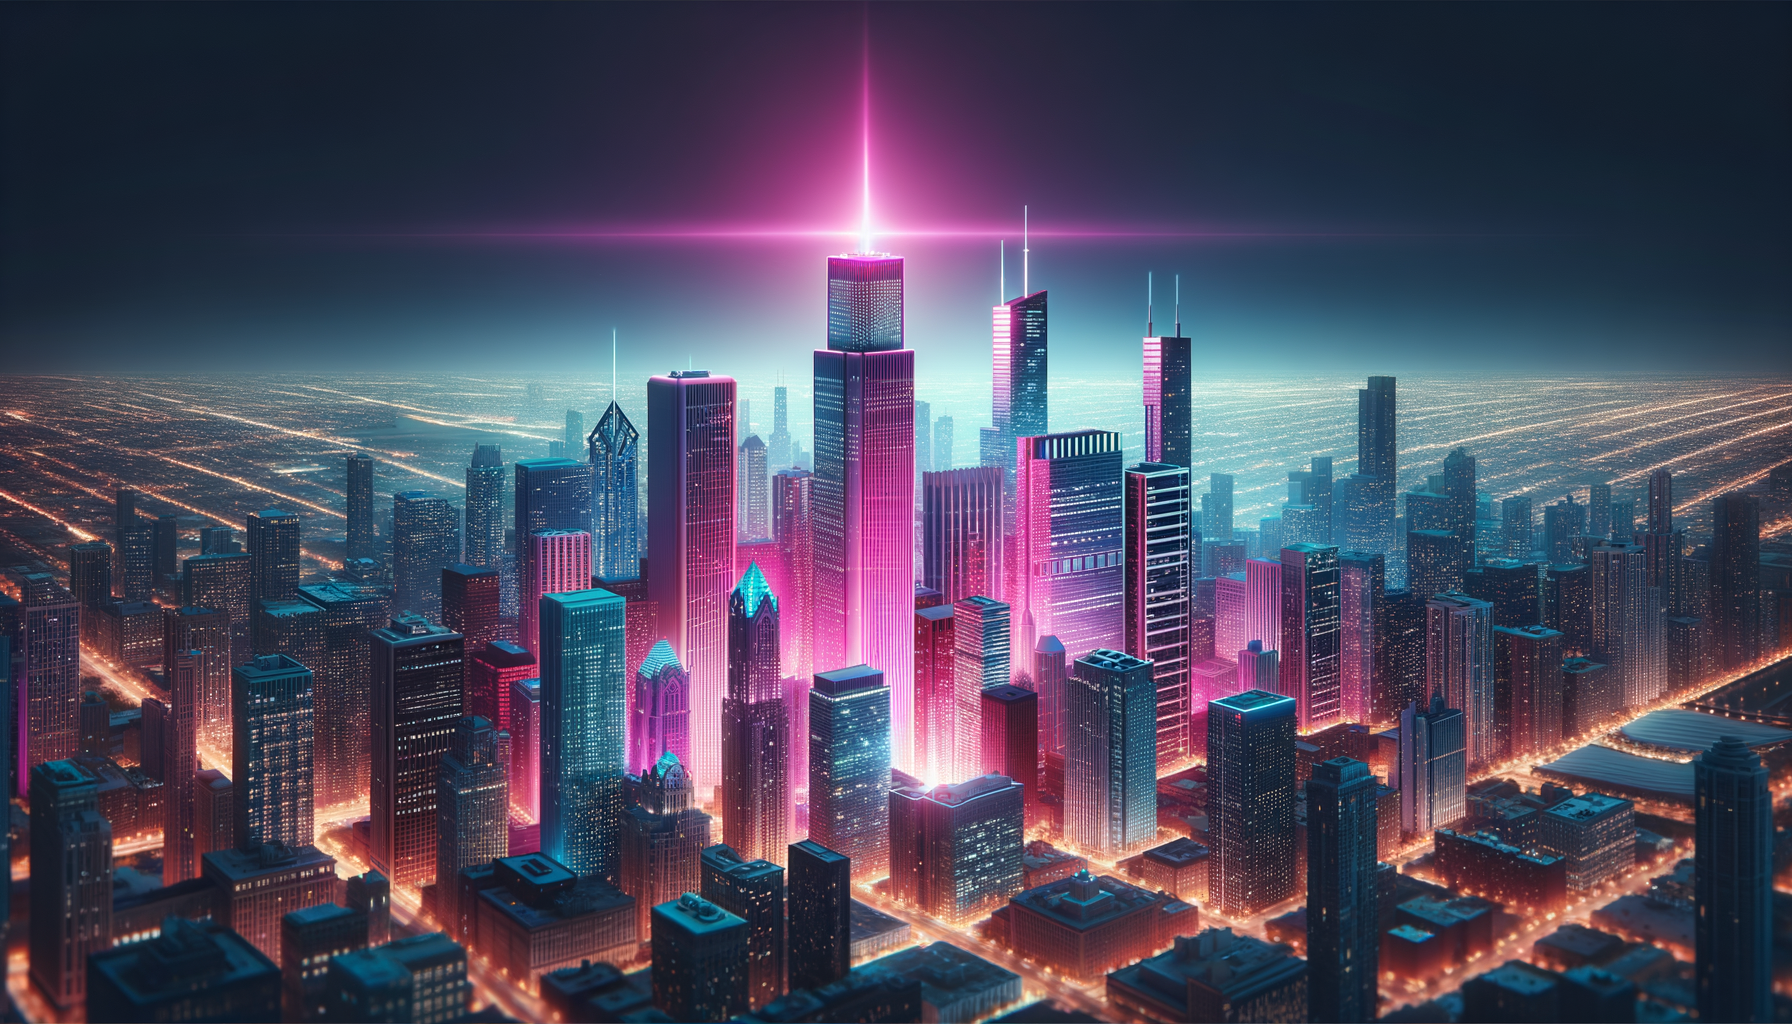 A striking illustration of Chicago, Illinois landscape with one prominent building glowing in a distinctive fuschia aura.